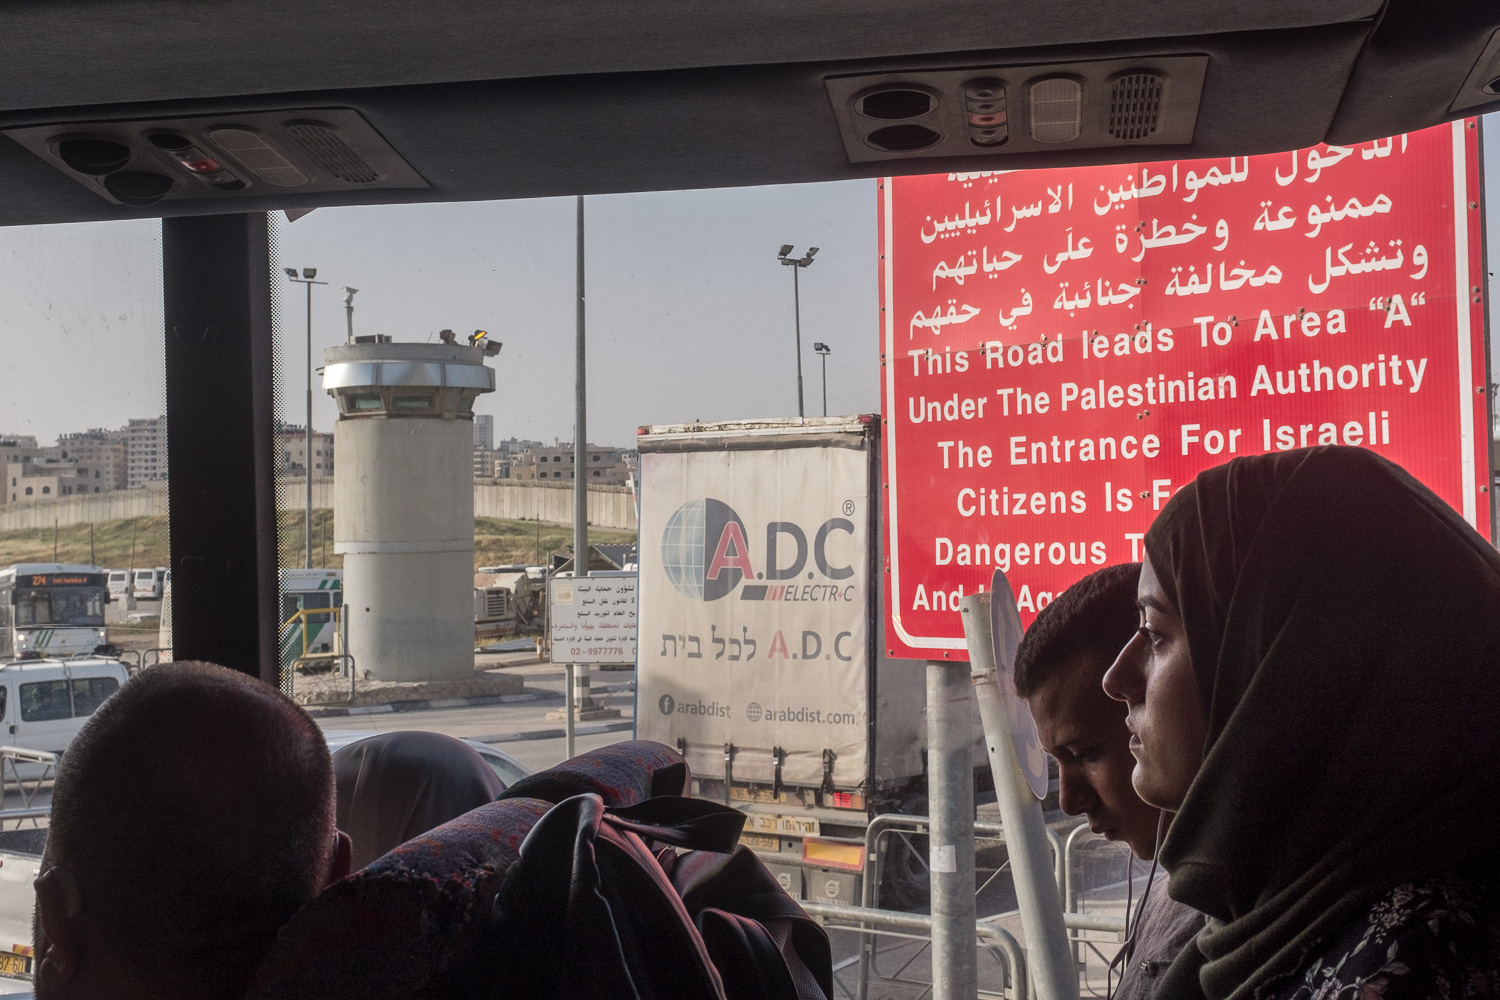  Bus to Ramallah, passing the Checkpoint into the West Bank. 